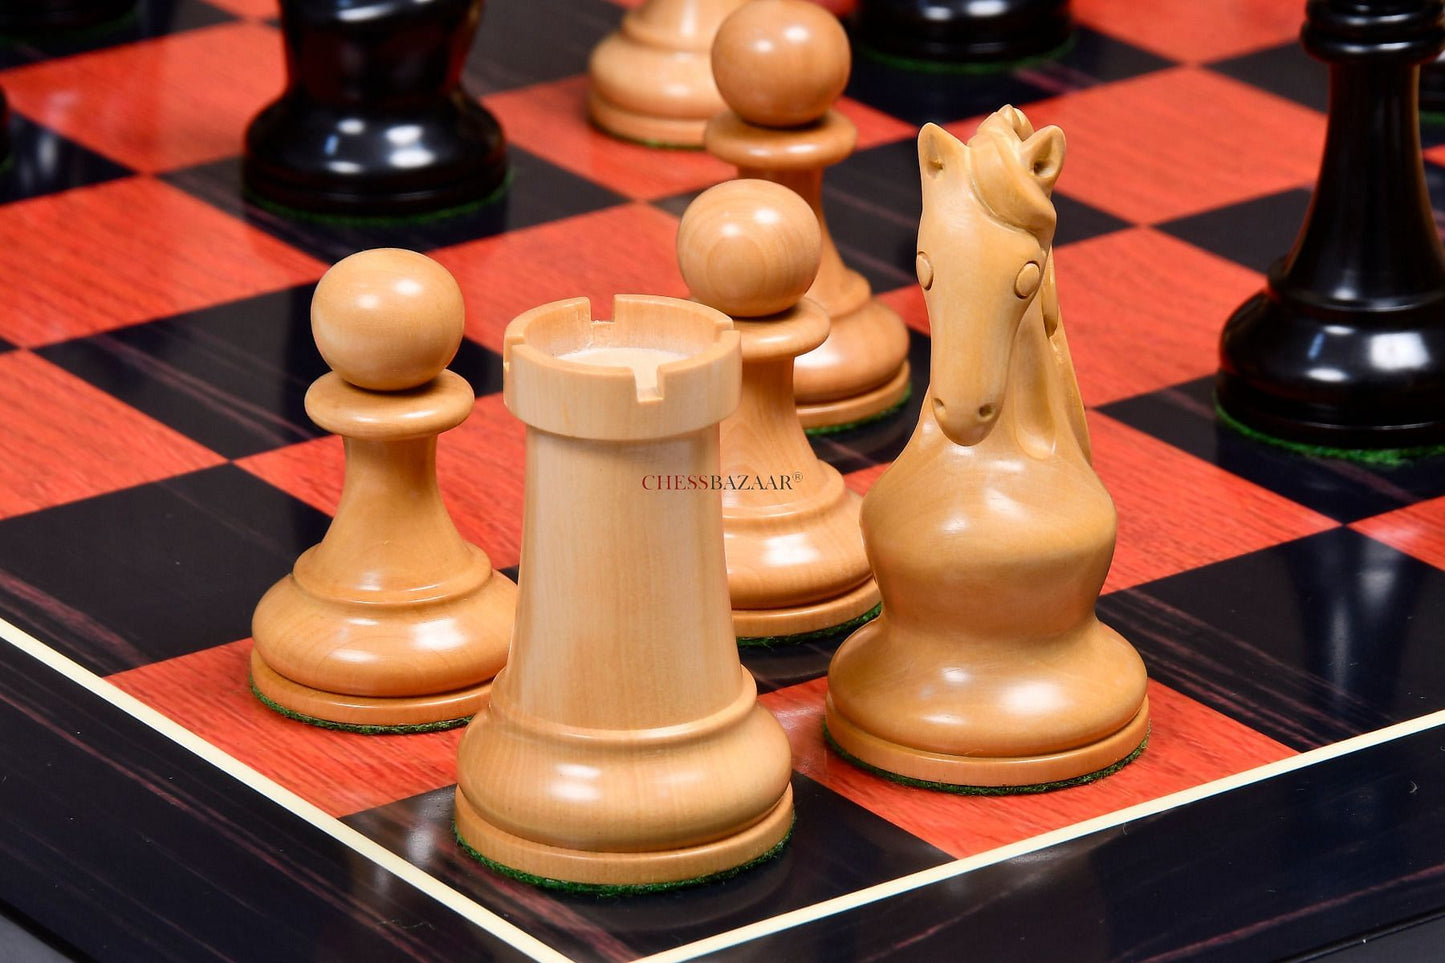 Reproduced 1963-1966 Piatigorsky Cup Chess Pieces in Ebony / Box Wood - 4.2" King